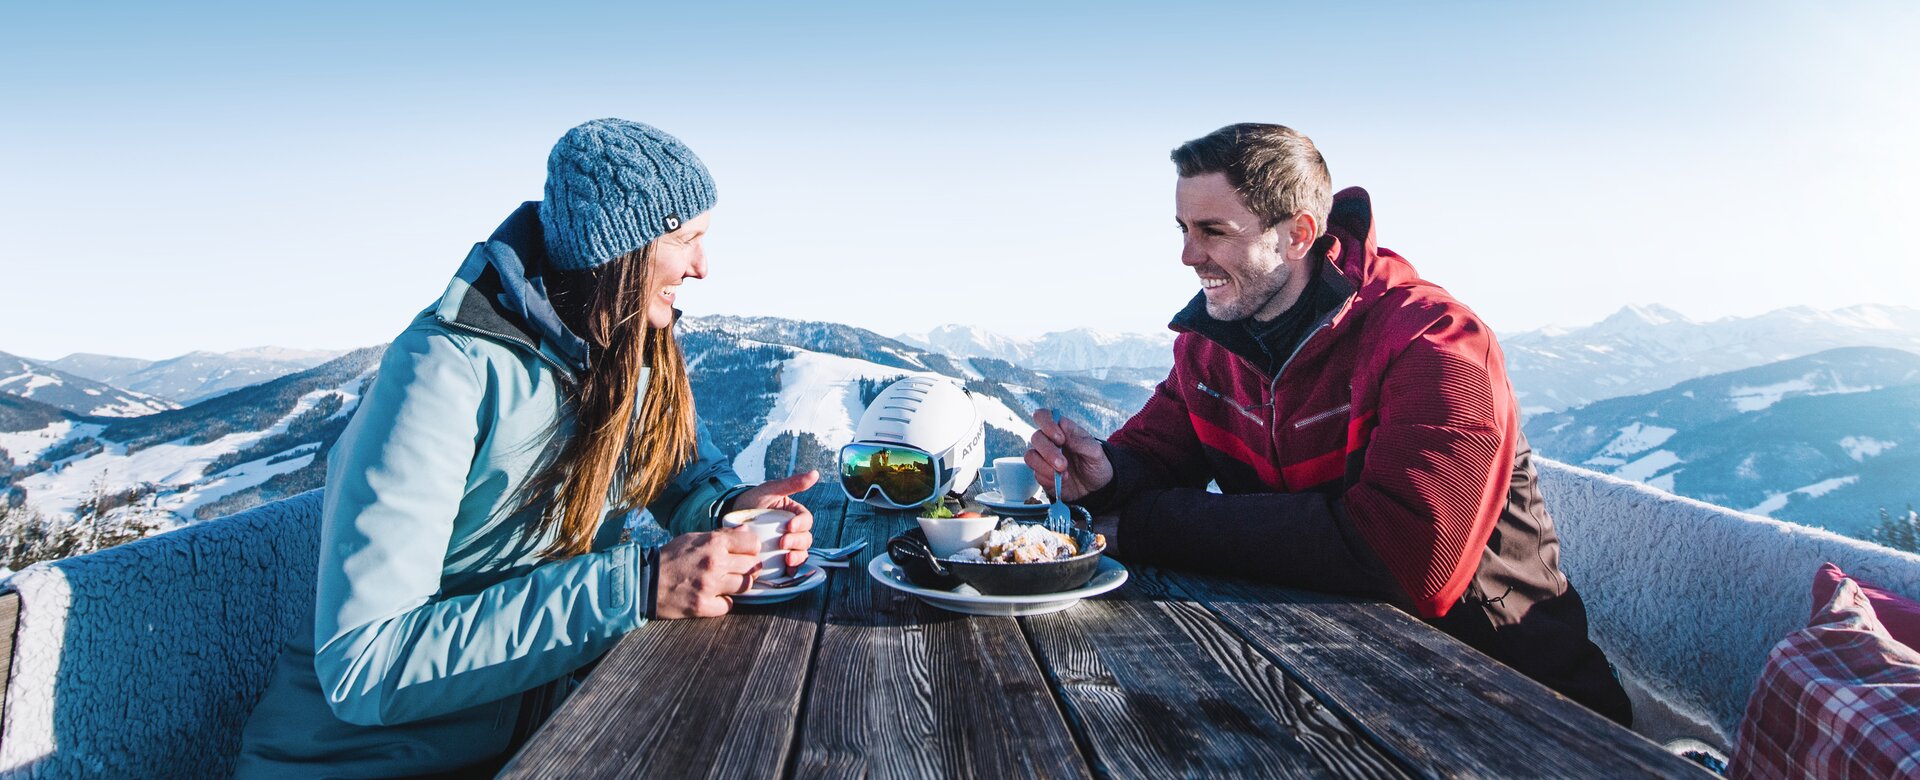 TASTE Ski amadé - the finest flavour from the Austrian mountains in cozy mountain huts